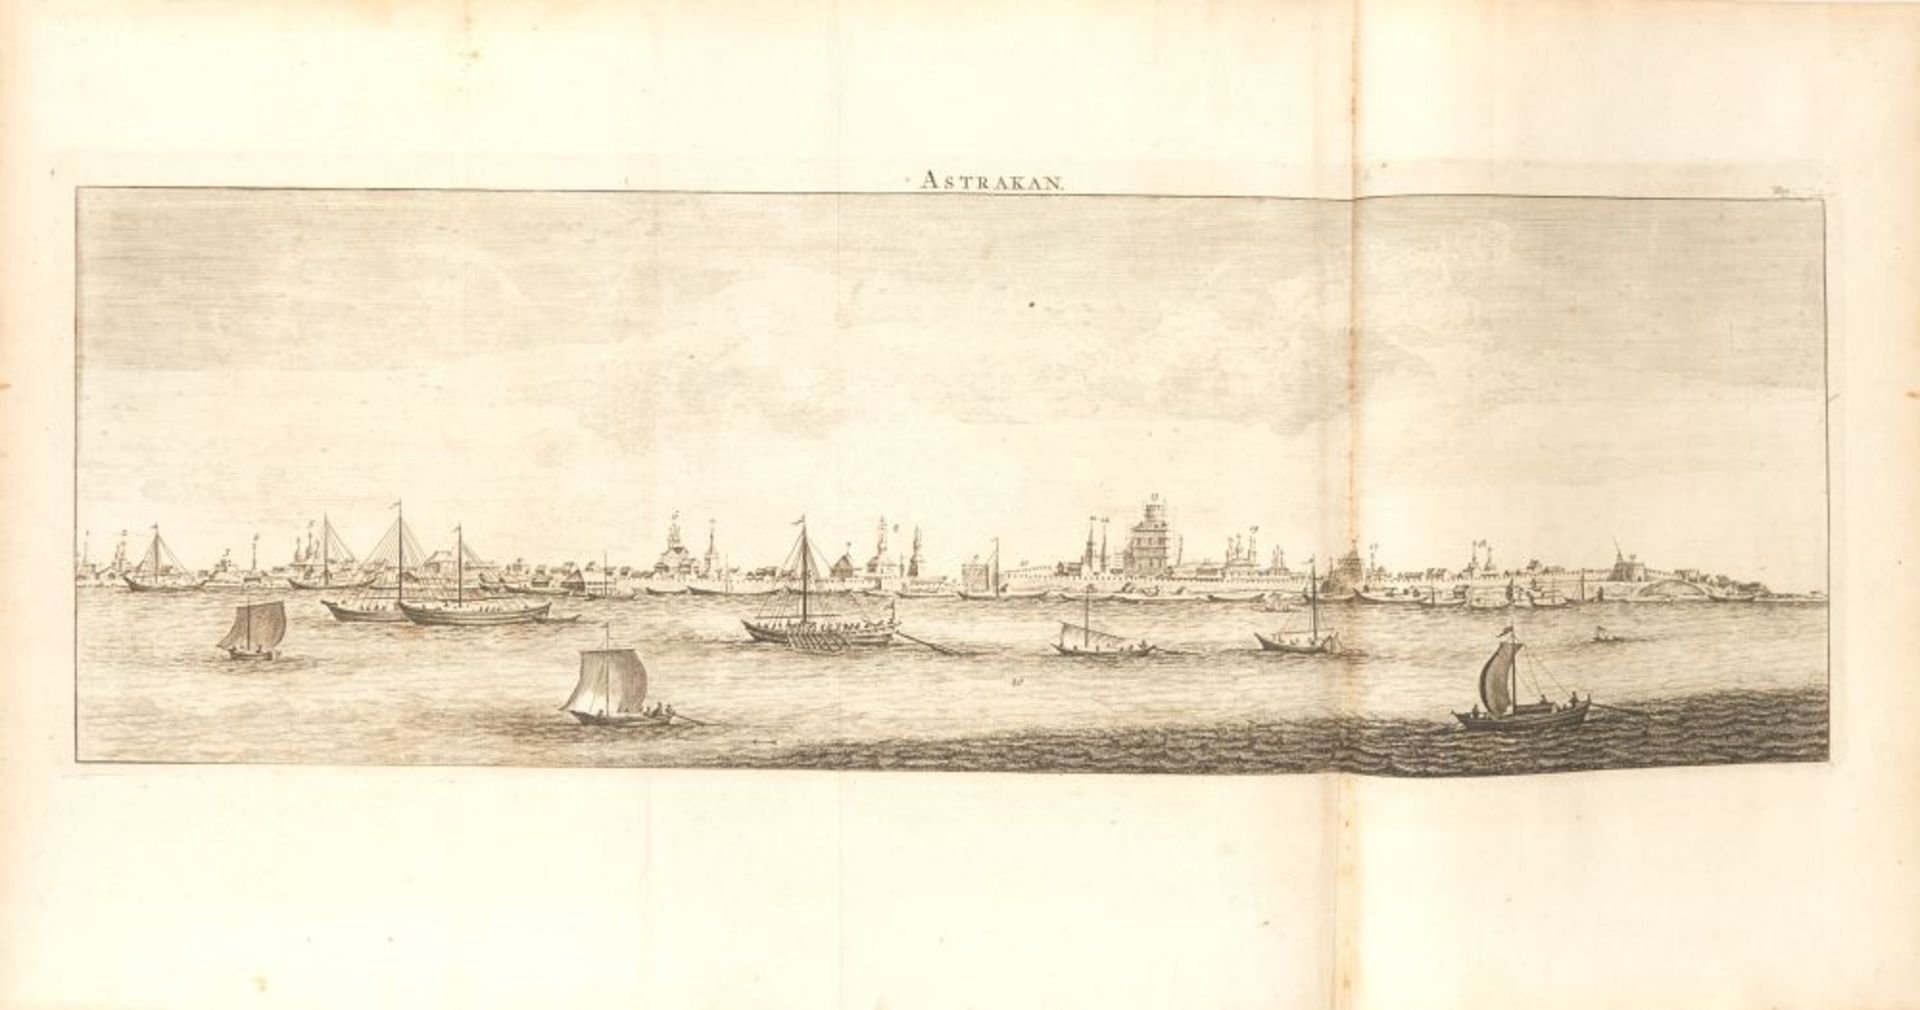 C. le Bruijn, Travels into Moscovy, Persia and East-Indies. London 1759.